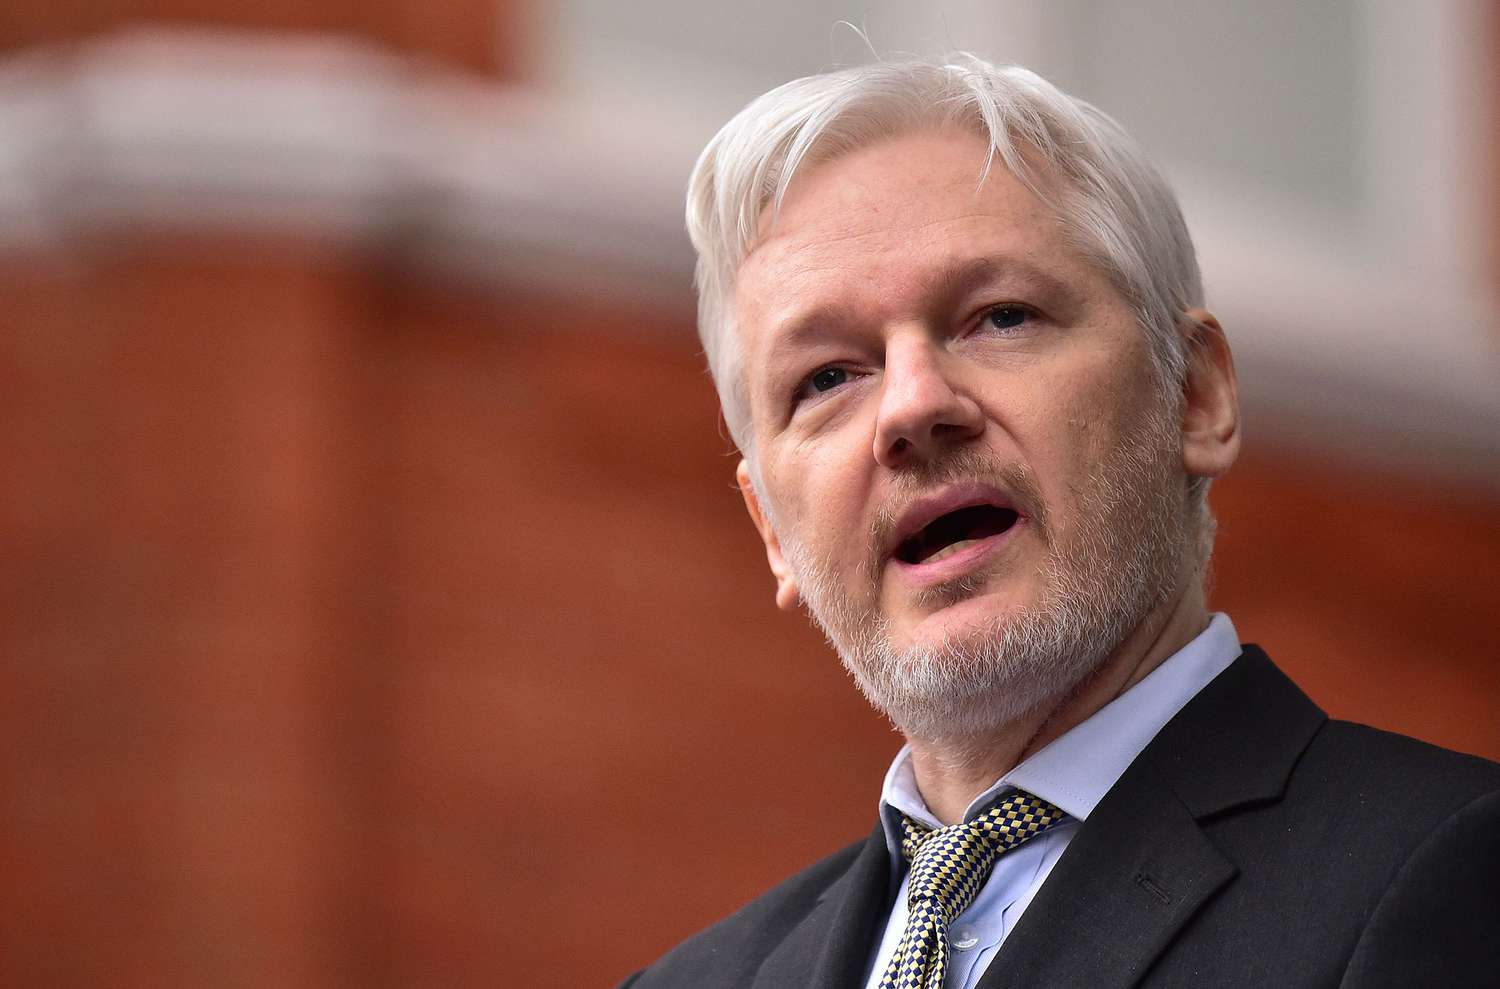 Julian Assange Released After 14-Year Extradition Battle, Cleared of Debts by Anonymous Bitcoin Donation